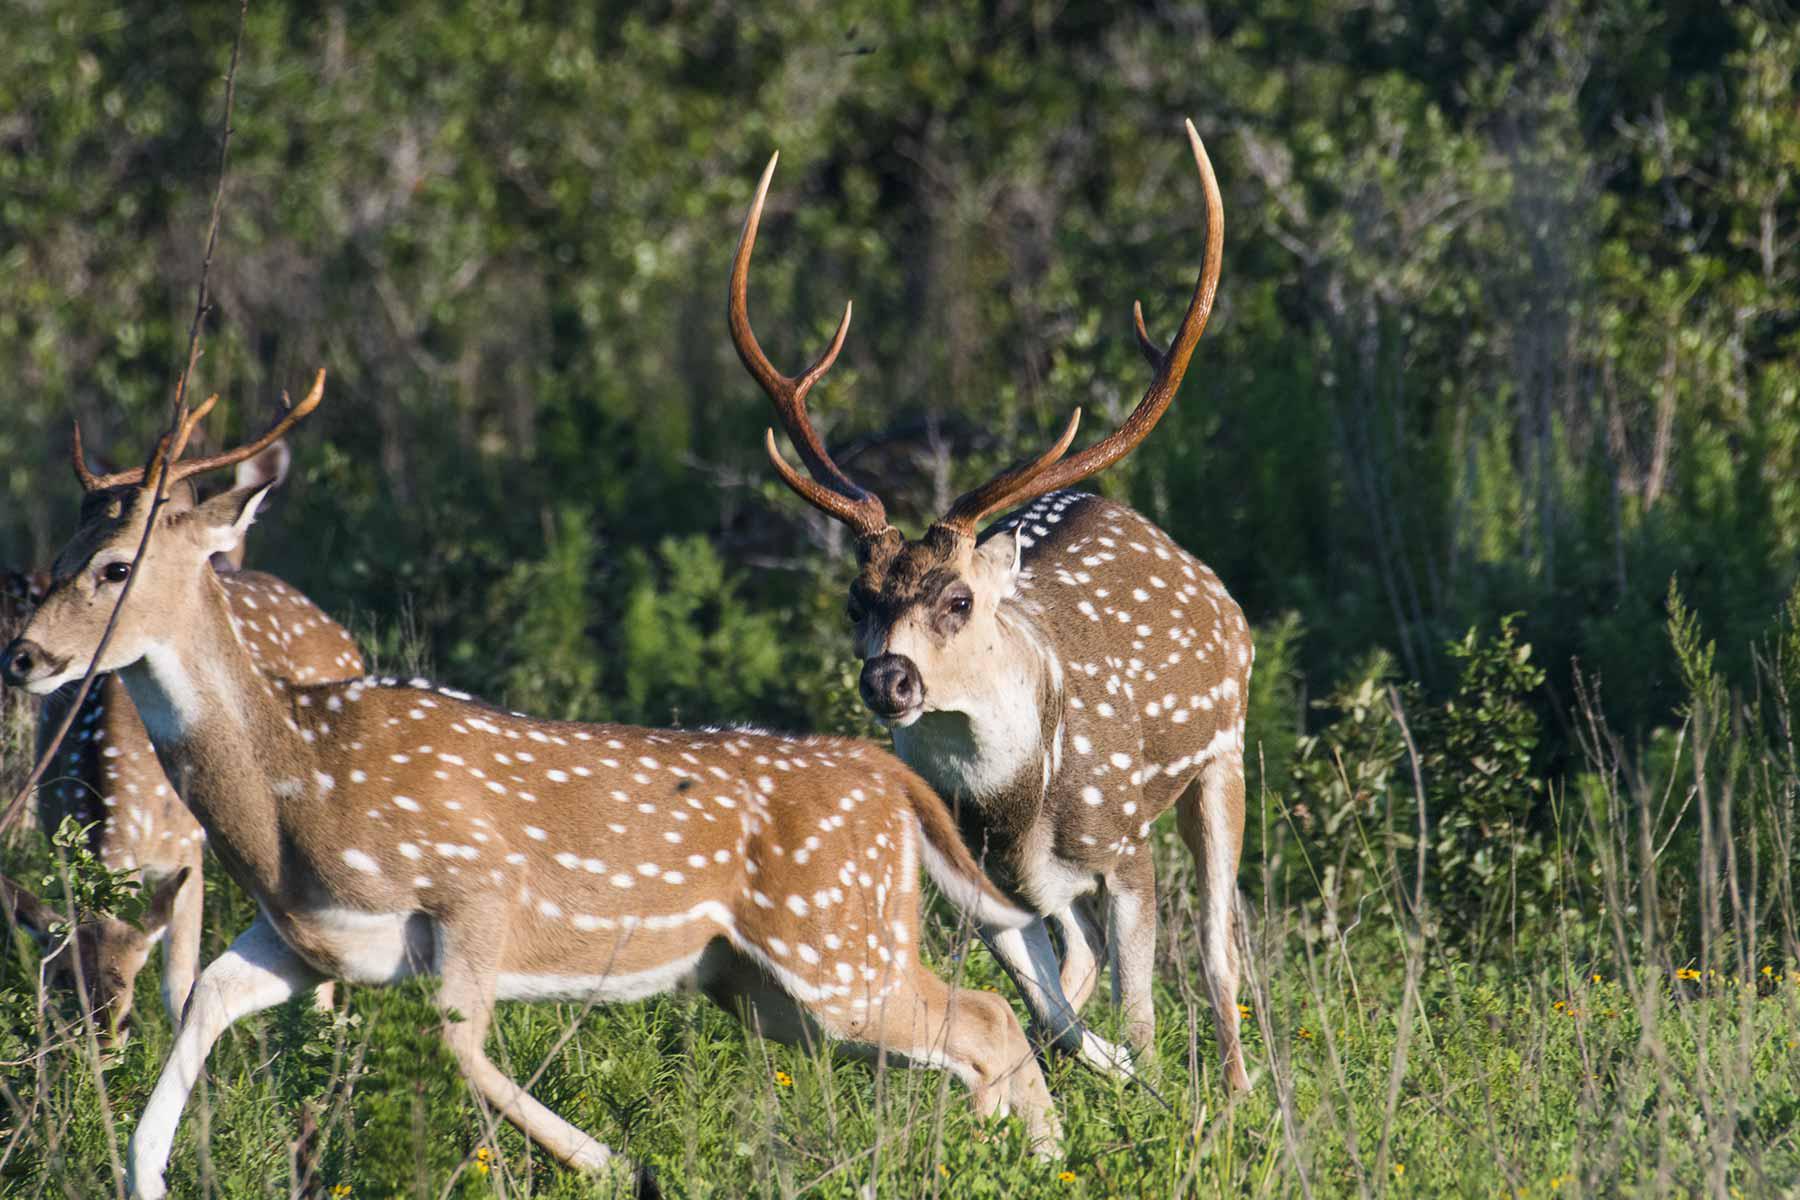 TPWD’s drawn hunt program proves lots of ‘bang for you buck’